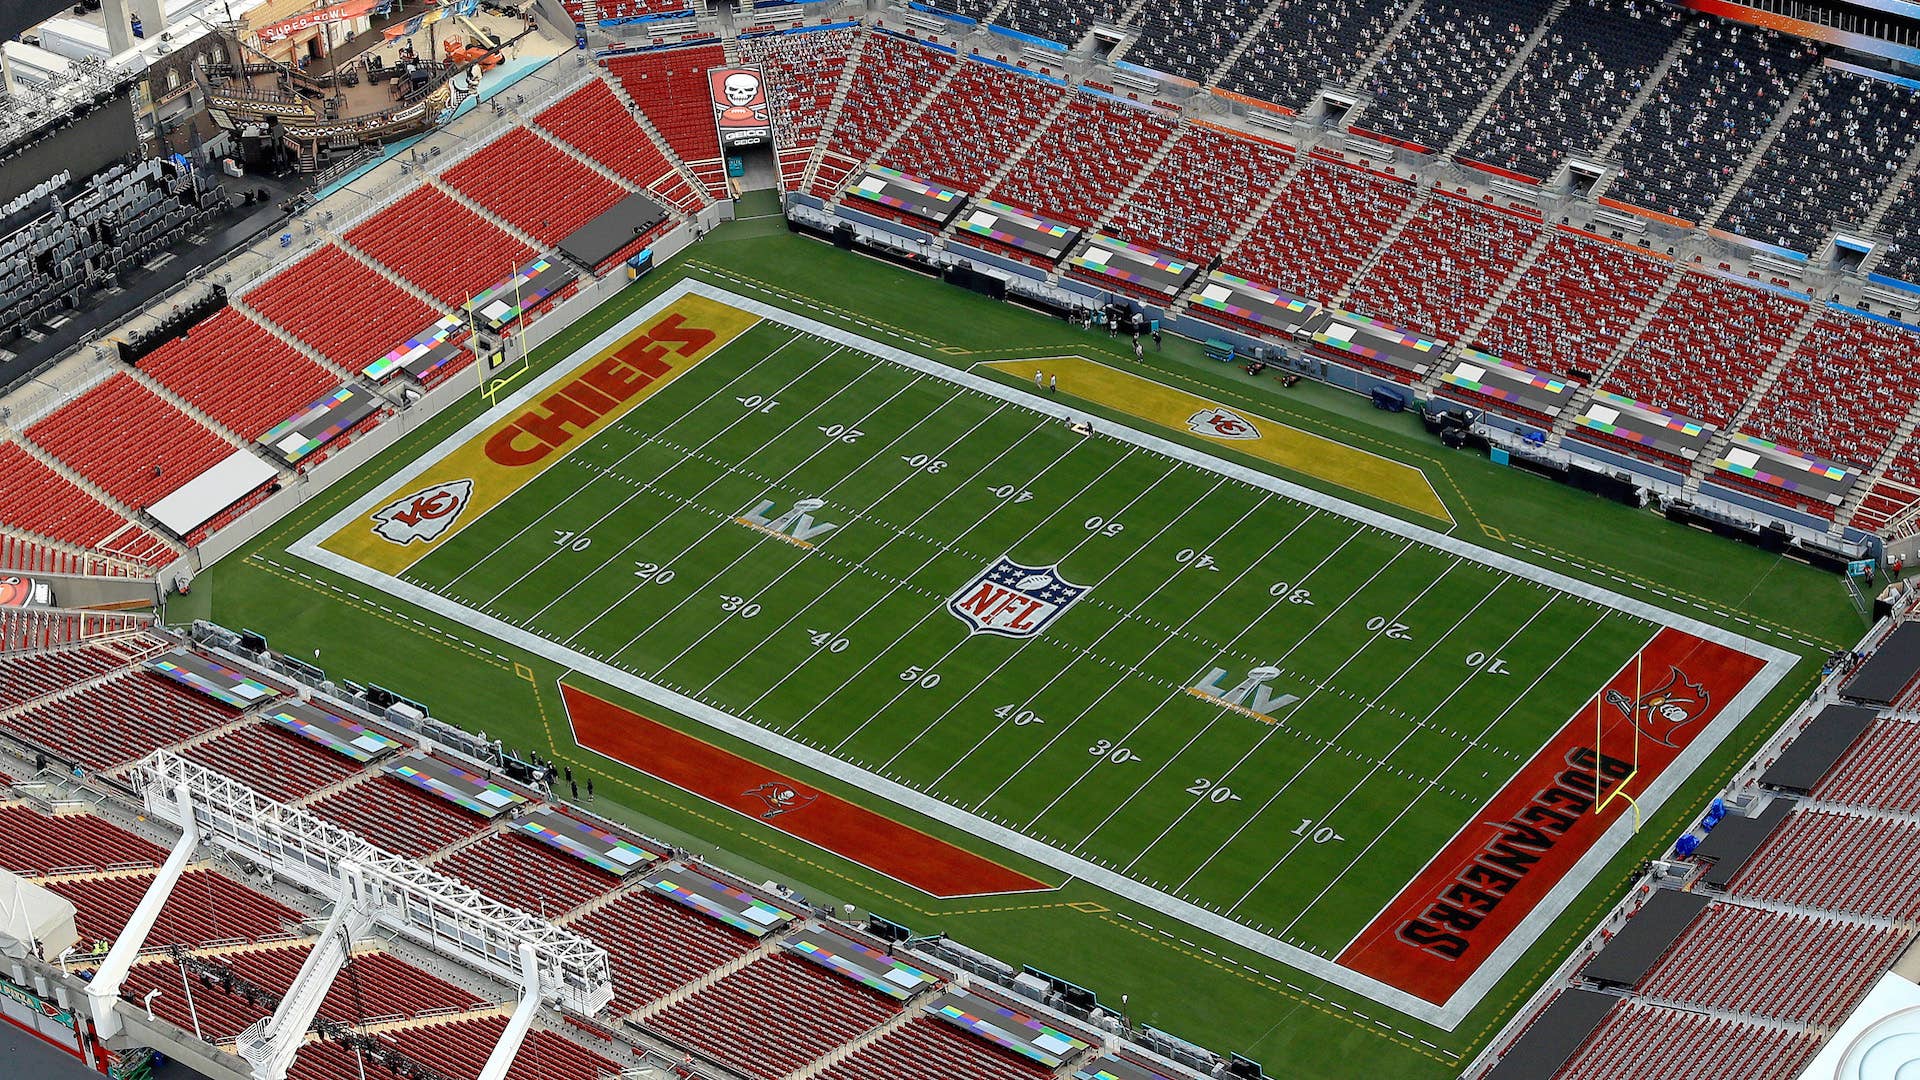 An aerial view of Raymond James Stadium ahead of Super Bowl LV